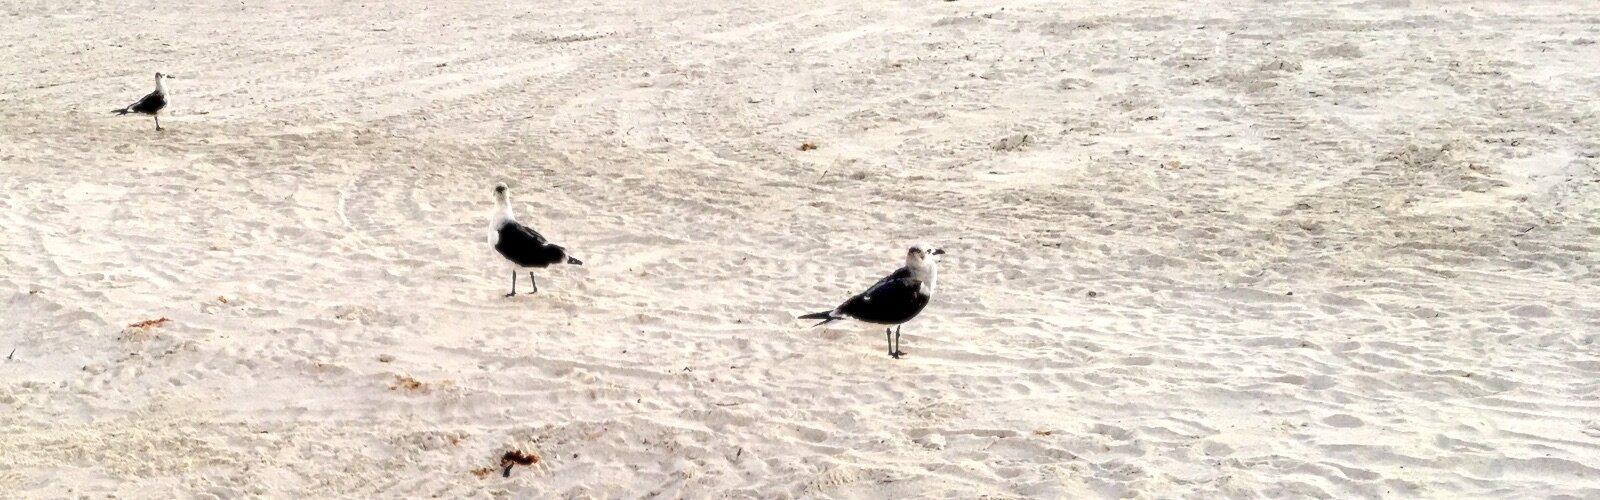 Birds of a feather flock together at Pass-A-Grille beach.